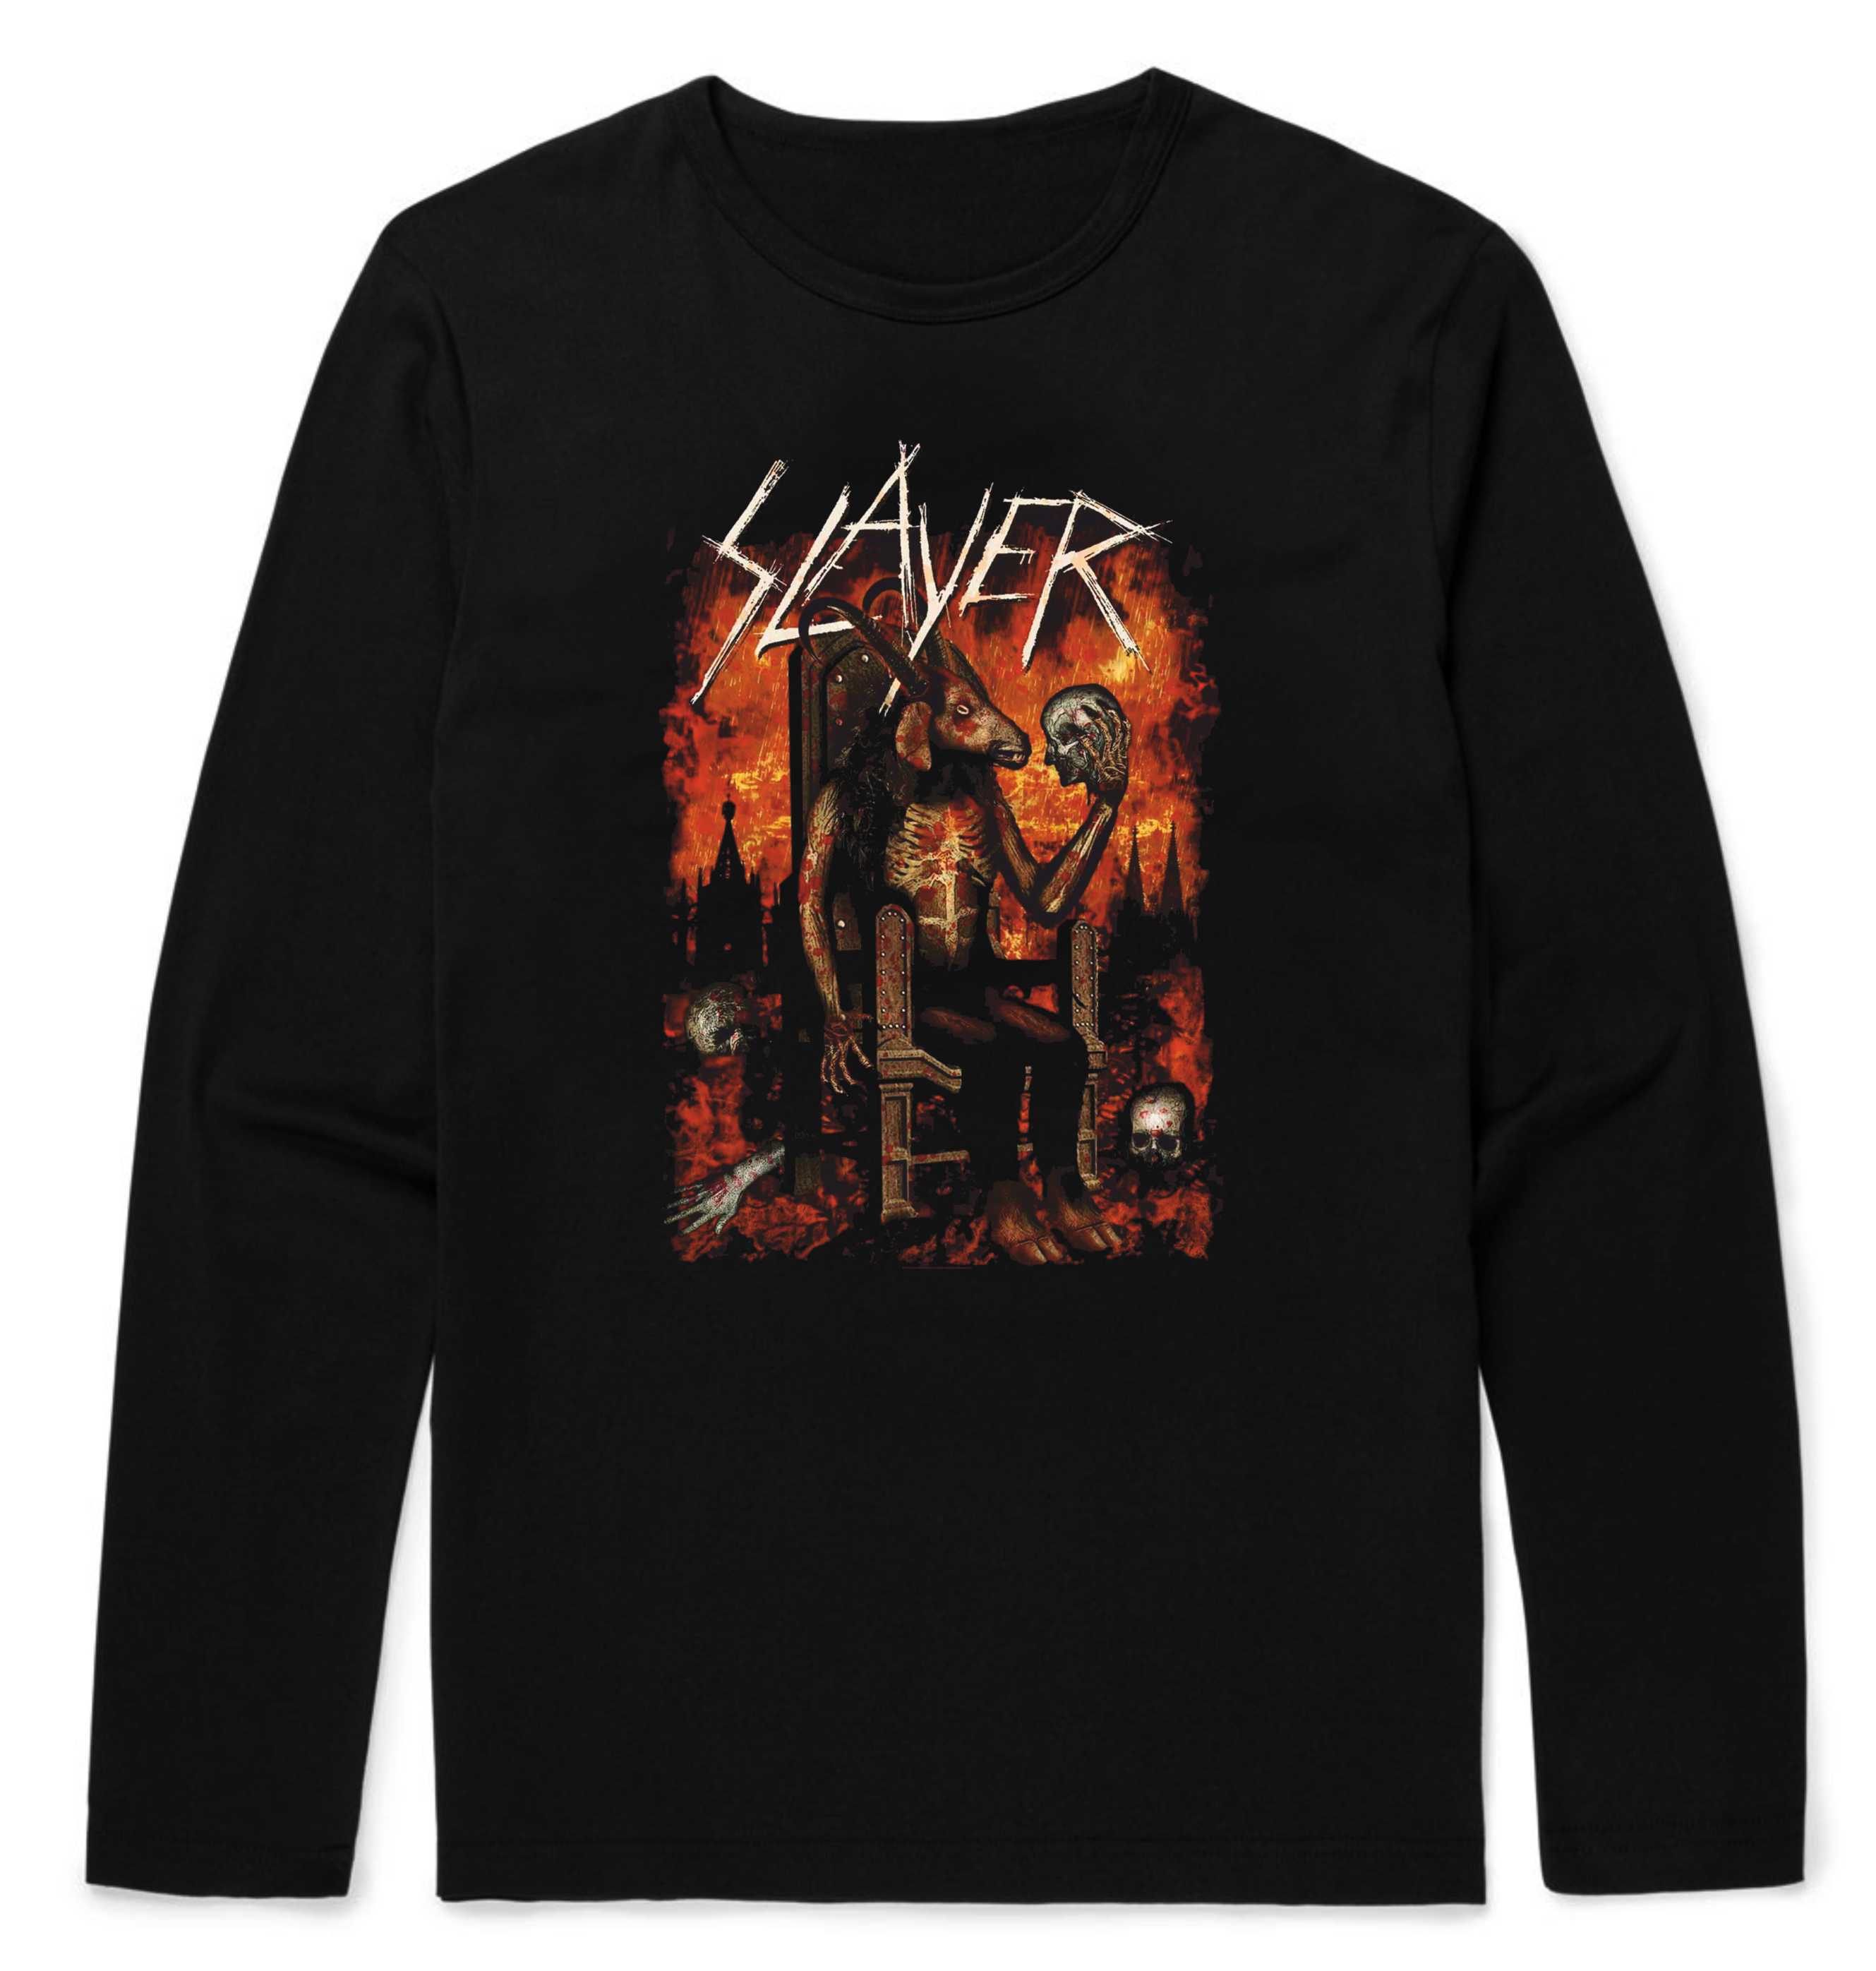 Slayer Reign In Blood Longsleeve T-Shirt – Metal & Rock T-shirts and ...